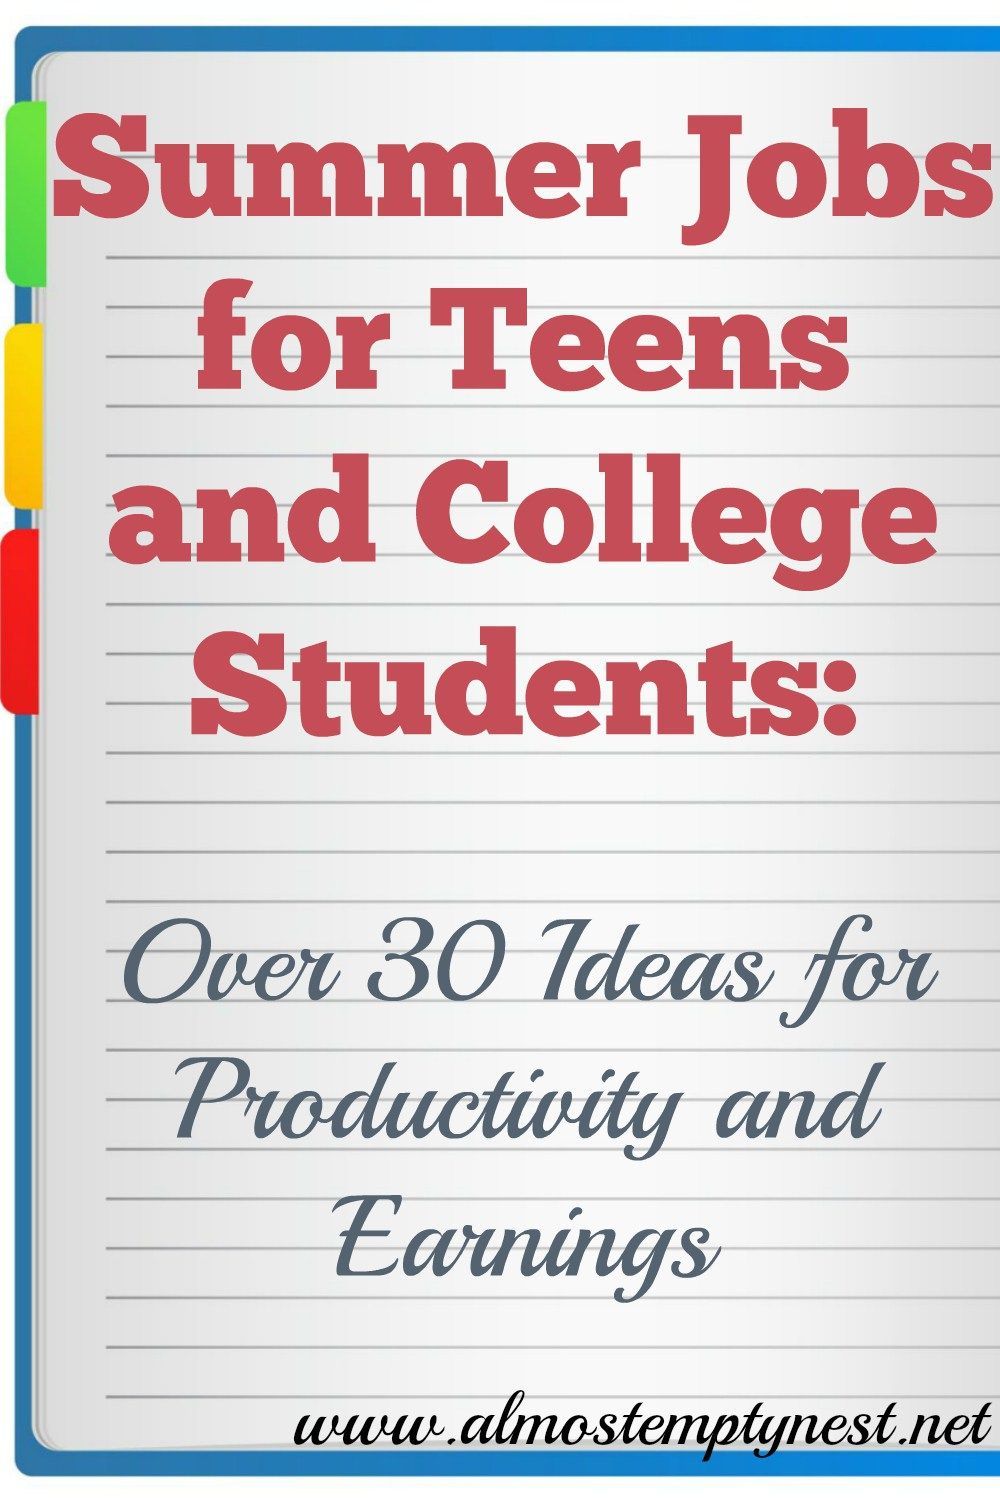 18 diy For Teens college students ideas